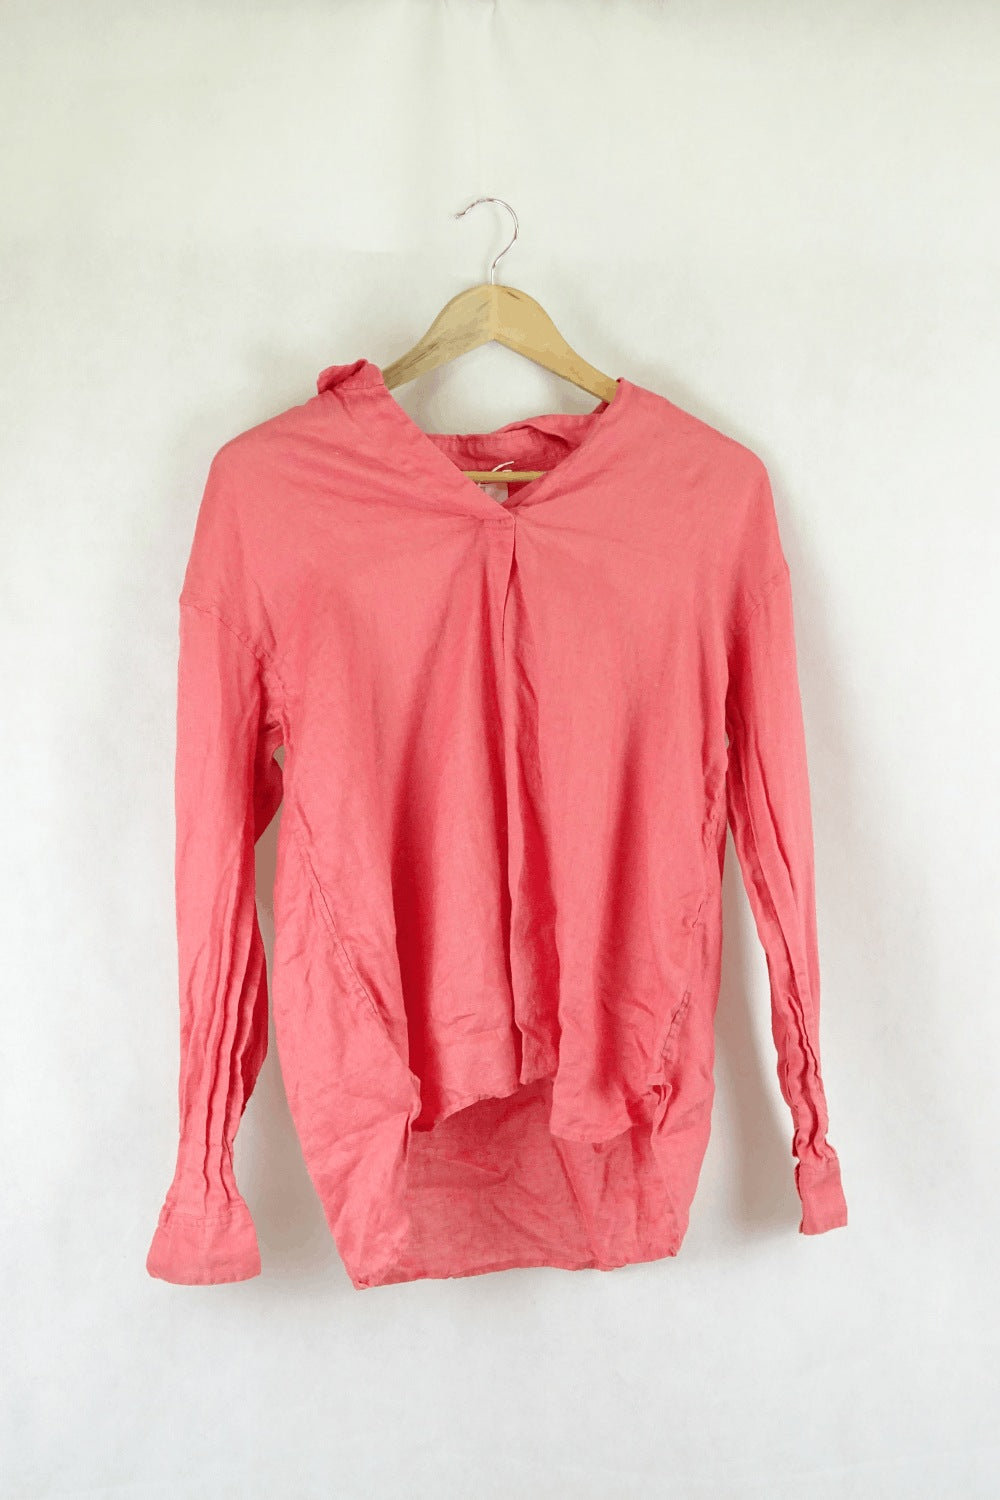 Uniqlo Pink Long Sleeve Button Down Top M